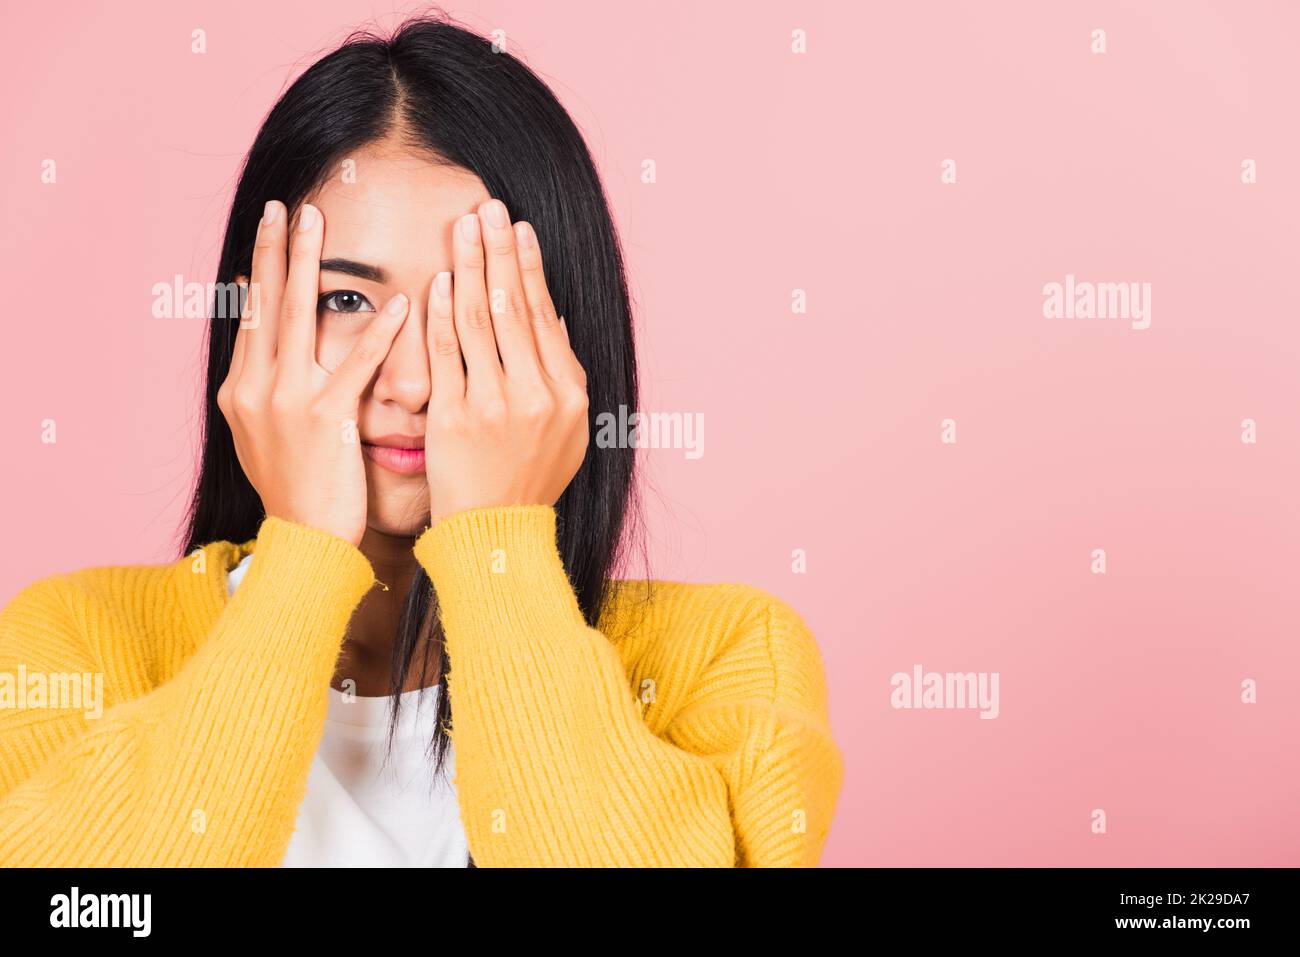 woman in depressed bad mood covering face with hands Stock Photo